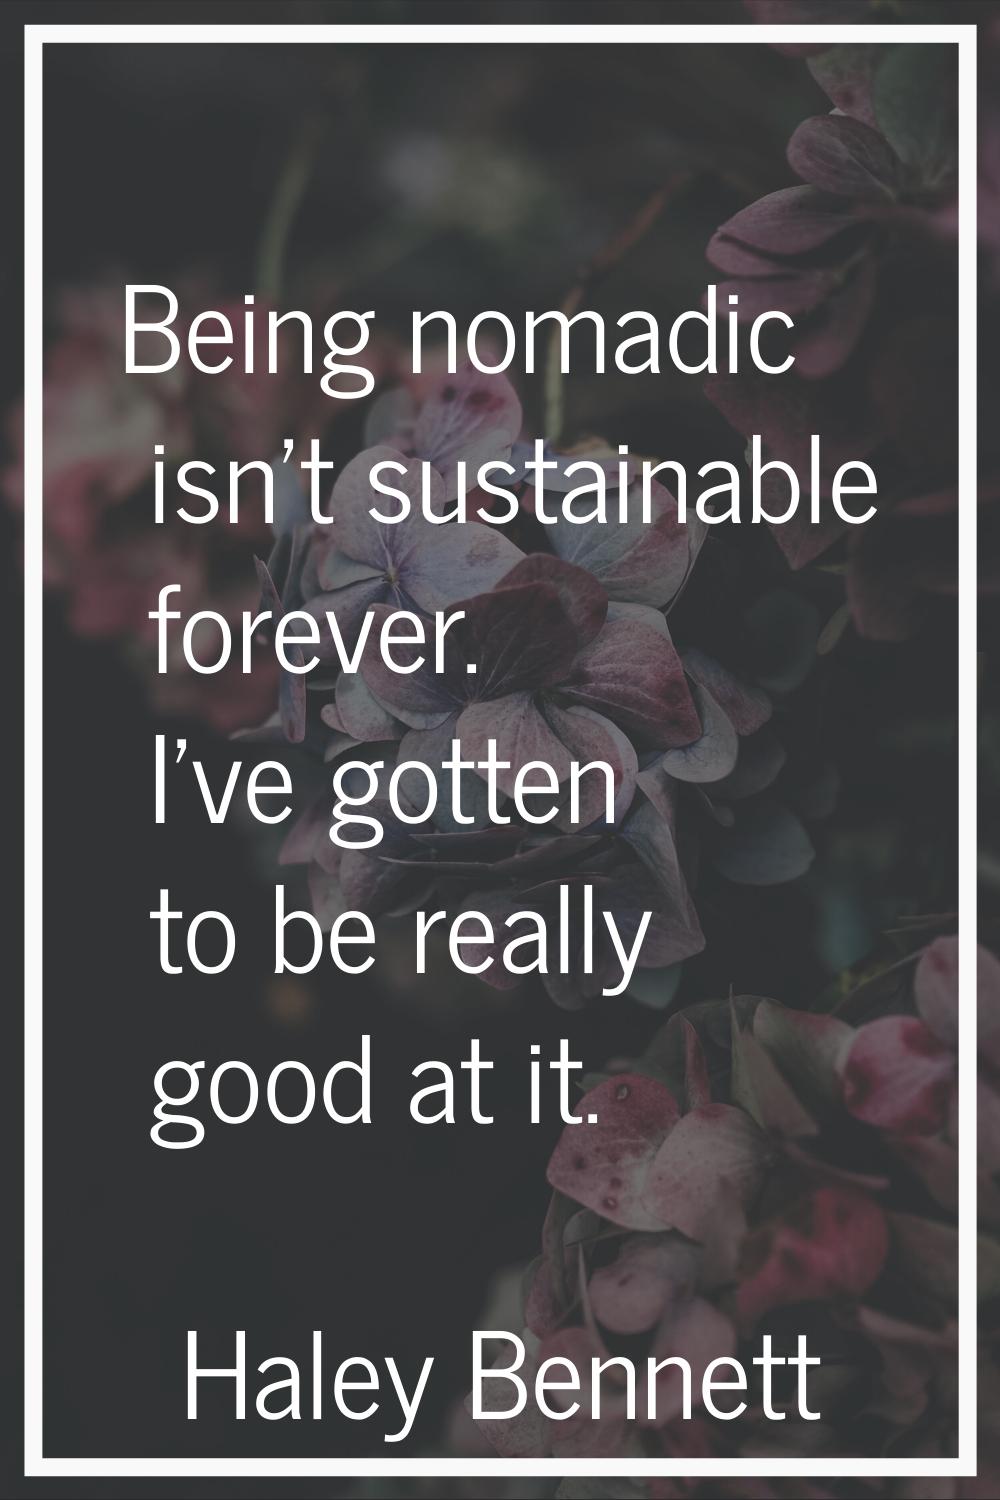 Being nomadic isn't sustainable forever. I've gotten to be really good at it.